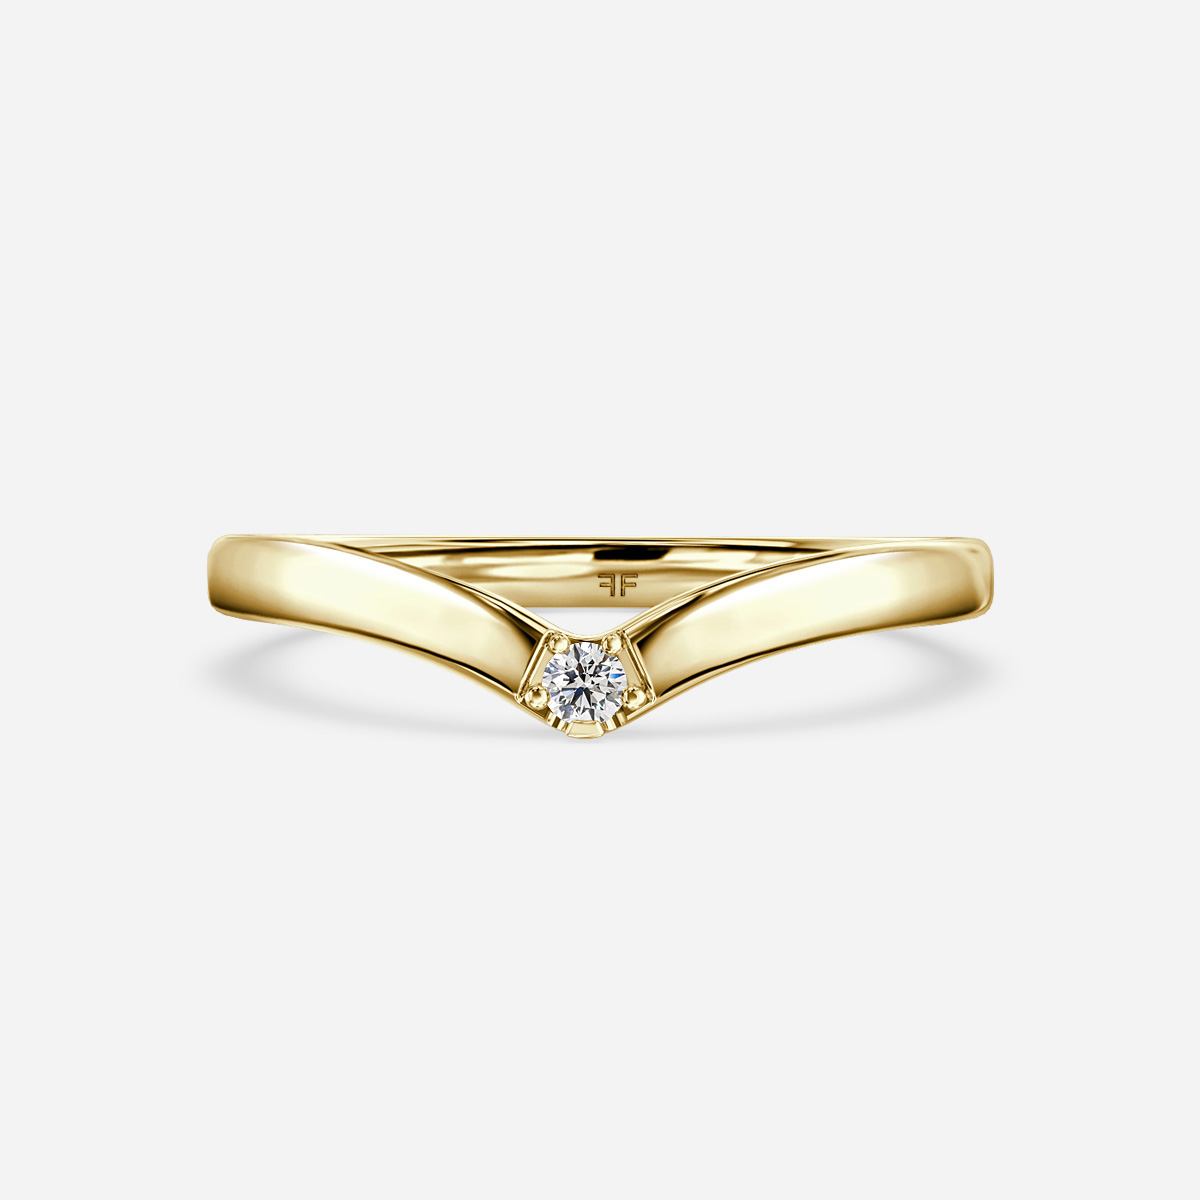 Coomi 20K Yellow Gold and Multi Sapphire and Diamond Eternity Ring. As seen  in Elle magazine. Jewelry in Elle Magazine Buy Shop Designer Fine Jewelry  Online Fine Indian Gold Jewelry Joallerie Colored